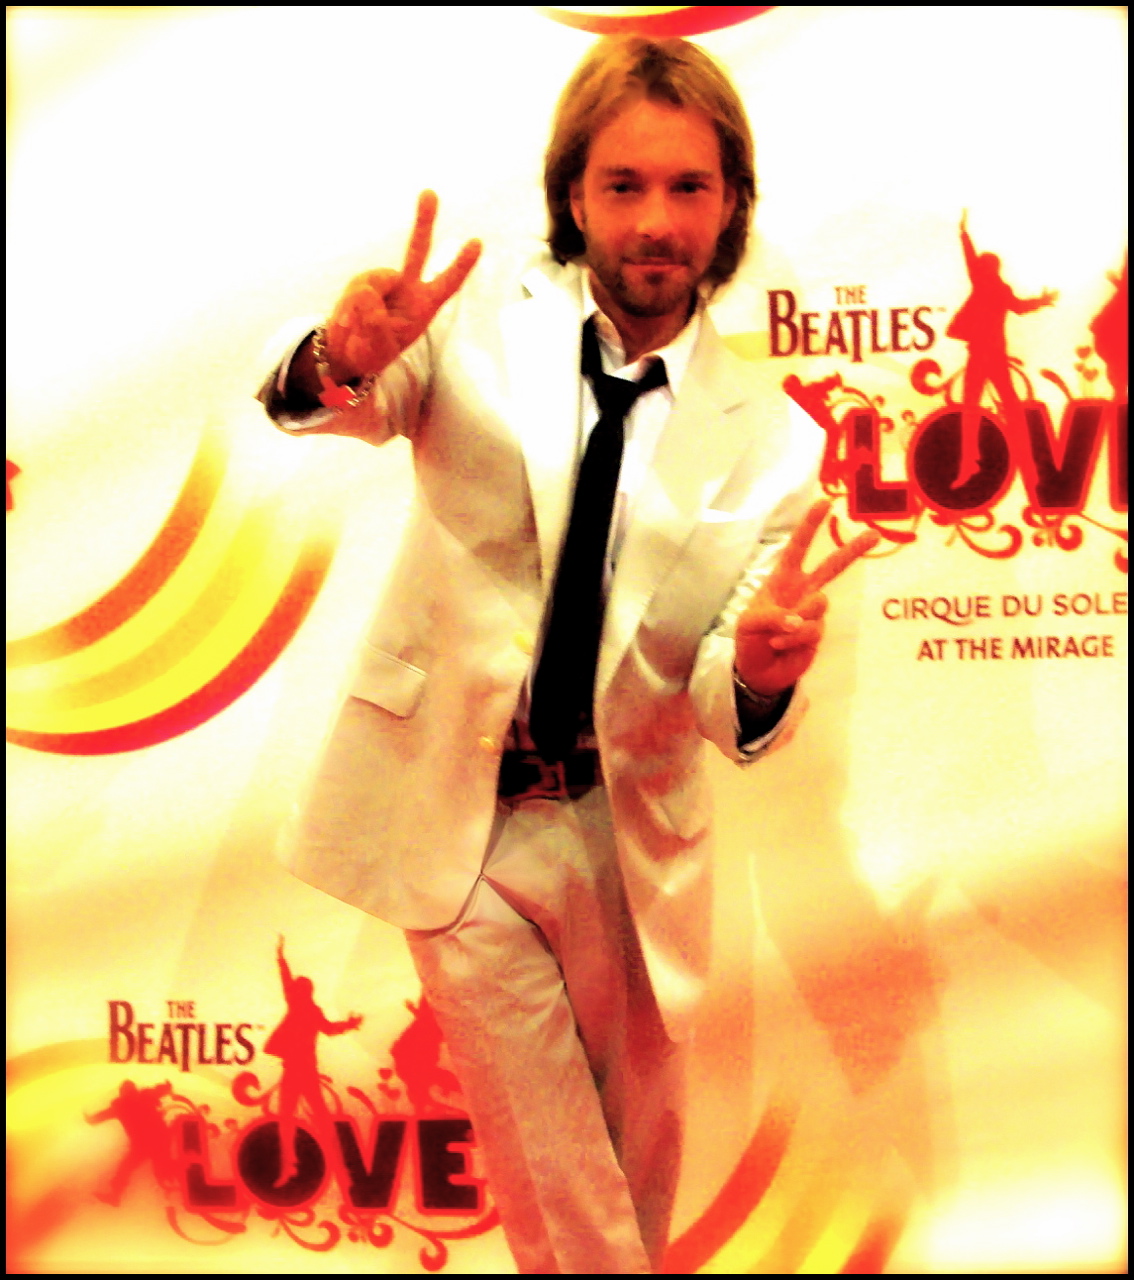 DAVID GIAMMARCO arrives for the World Premiere of the Beatles 